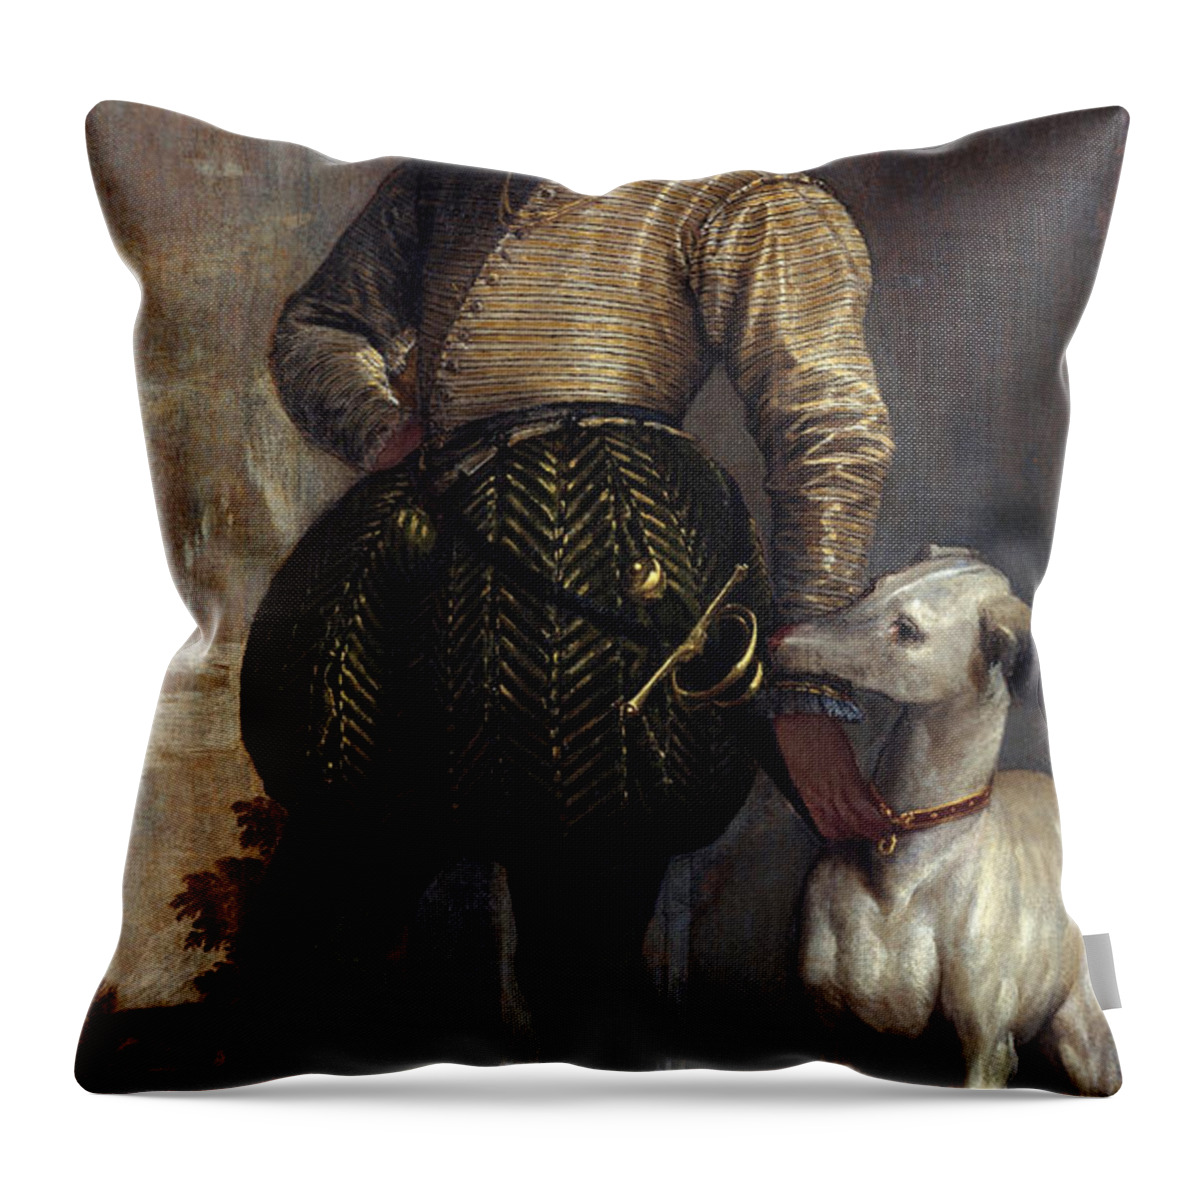 Paolo Veronese Throw Pillow featuring the painting Boy with a Greyhound by Paolo Veronese